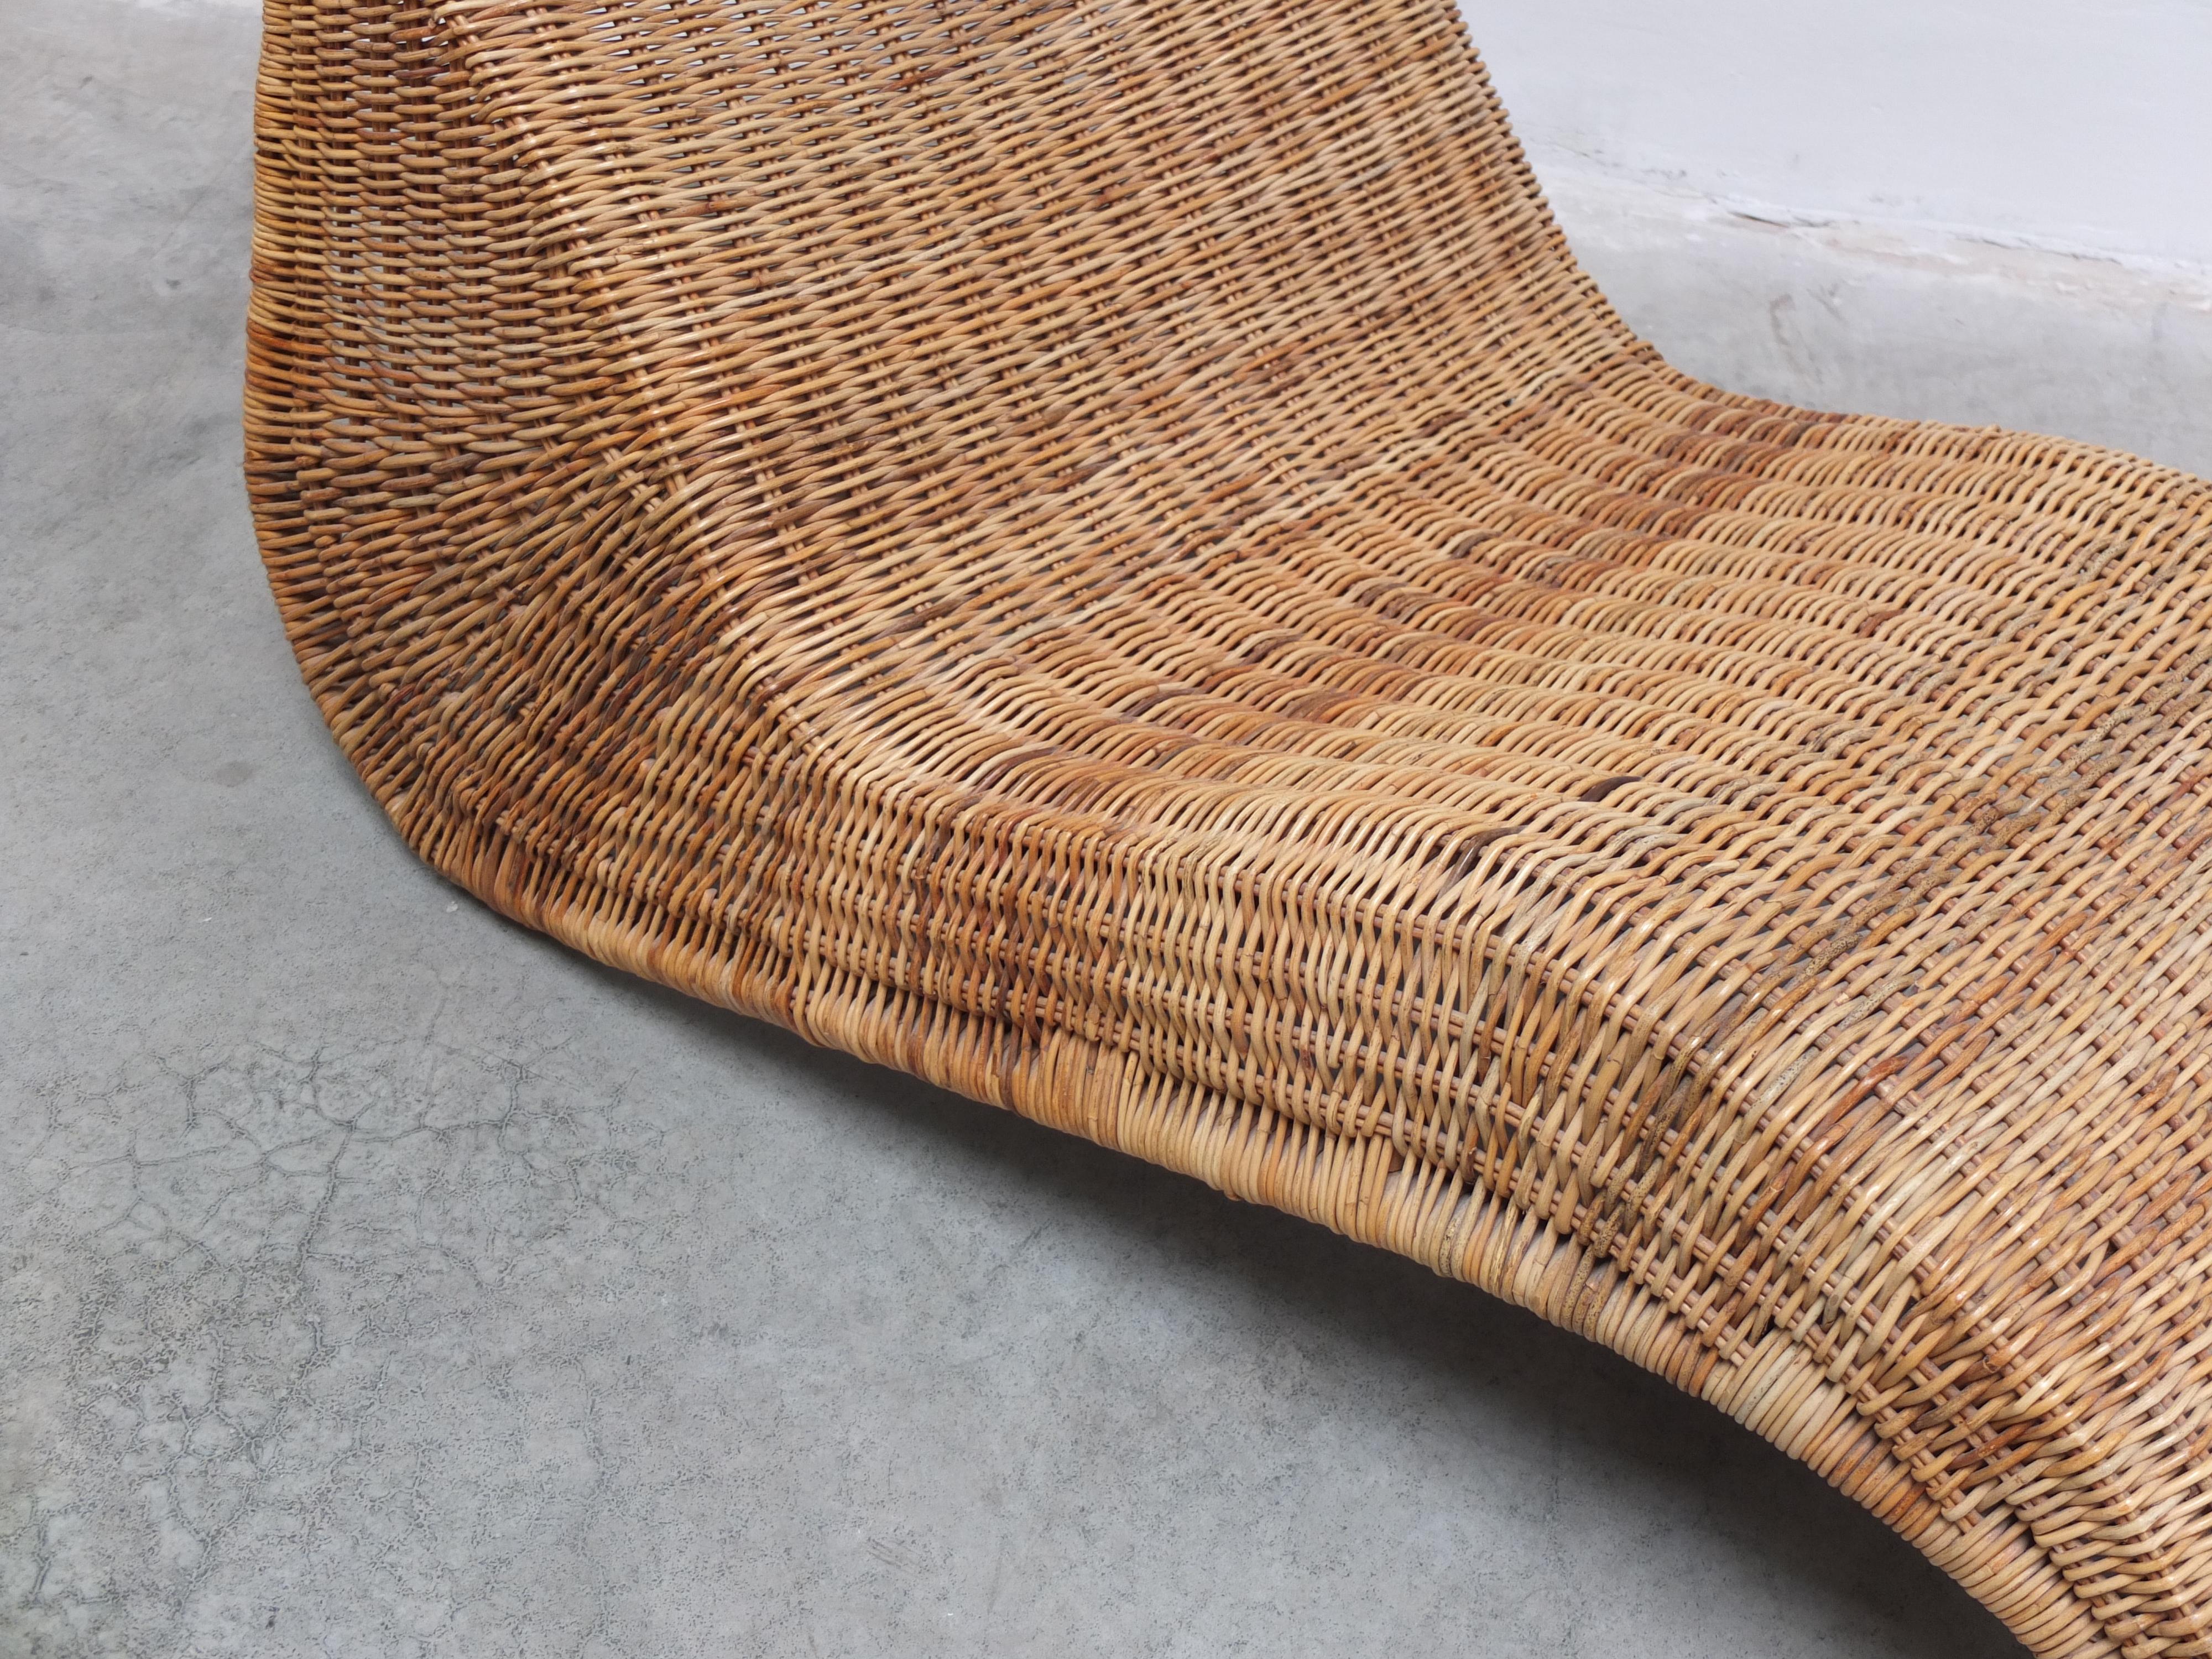 Late 20th Century Rattan 'Karlskrona' Chaise Longue by Karl Malmvell for IKEA, 1998 For Sale